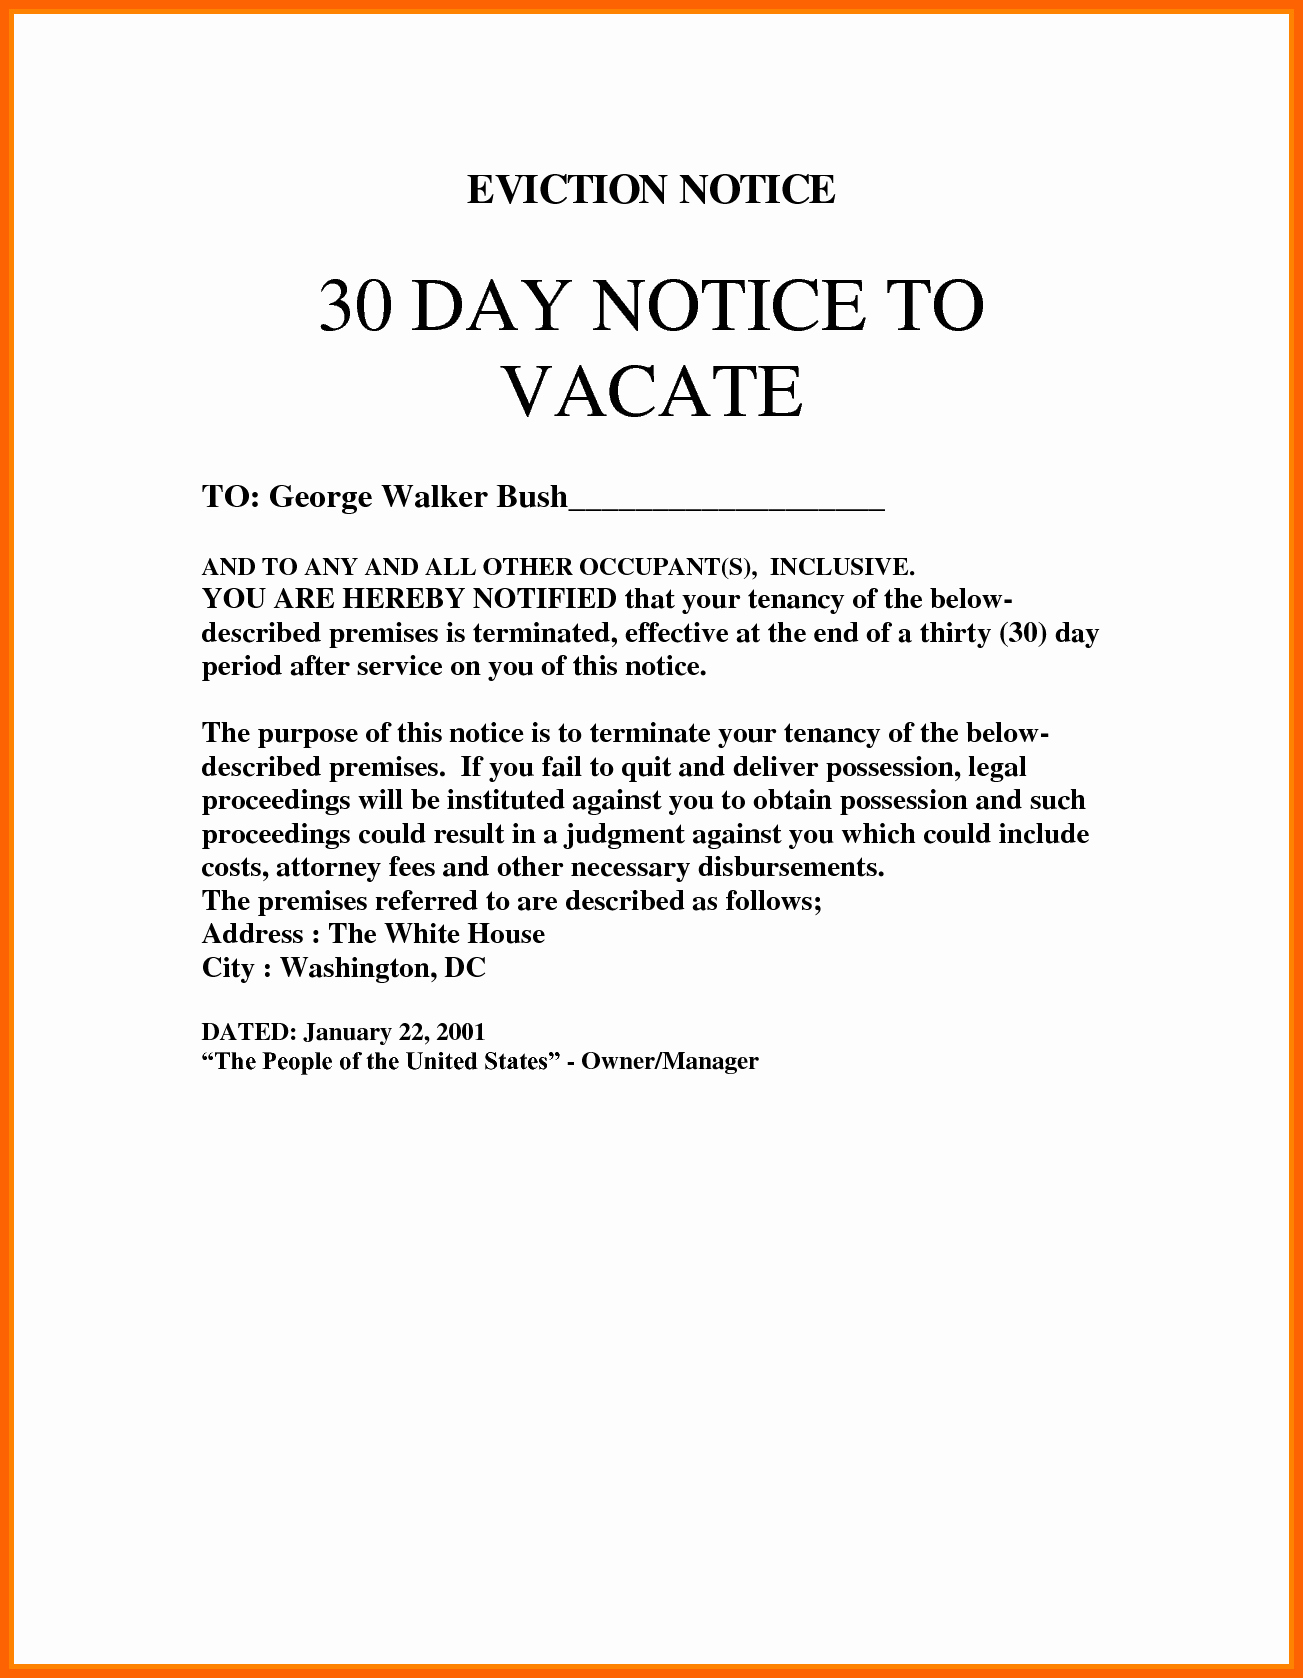 30 Day Eviction Notice Template Elegant 30 Day Eviction Notice Template